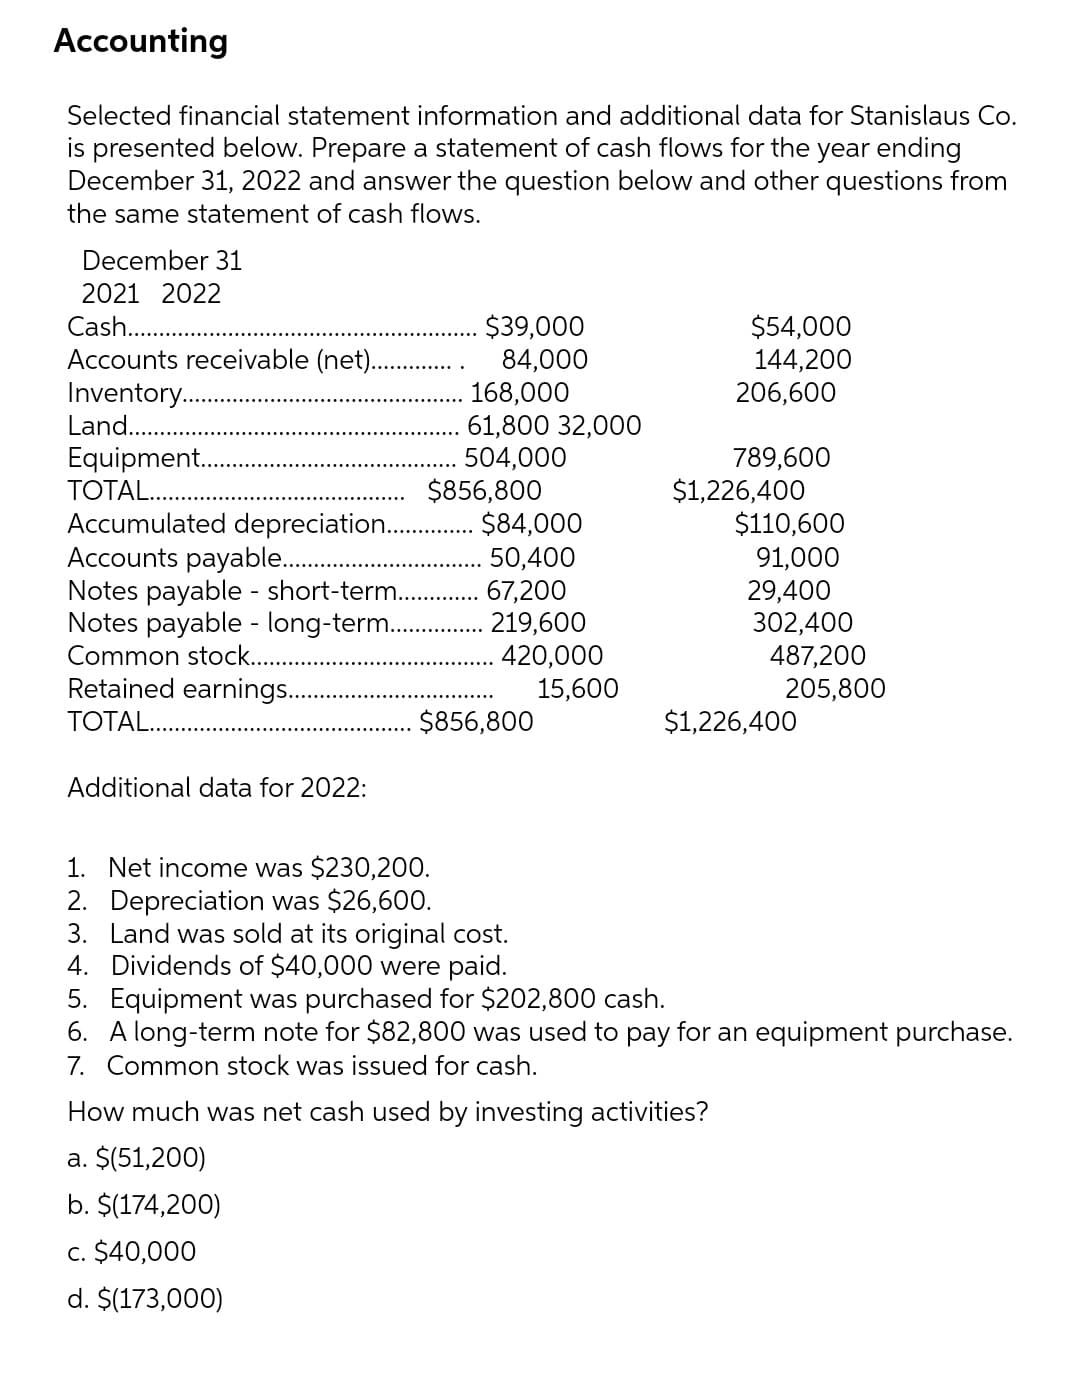 Accounting
Selected financial statement information and additional data for Stanislaus Co.
is presented below. Prepare a statement of cash flows for the year ending
December 31, 2022 and answer the question below and other questions from
the same statement of cash flows.
December 31
2021 2022
Cash..
Accounts receivable (net).
Inventory.
Land..
$39,000
84,000
168,000
61,800 32,000
504,000
$856,800
$84,000
$54,000
144,200
206,600
Equipment.
TOTAL.
Accumulated depreciation..
Accounts payable..
Notes payable - short-term.
Notes payable - long-term..
Common stock.
Retained earnings.
50,400
67,200
219,600
420,000
15,600
789,600
$1,226,400
$110,600
91,000
29,400
302,400
487,200
205,800
TOTAL..
$856,800
$1,226,400
Additional data for 2022:
1. Net income was $230,200.
2. Depreciation was $26,600.
3. Land was sold at its original cost.
4. Dividends of $40,000 were paid.
5. Equipment was purchased for $202,800 cash.
6. A long-term note for $82,800 was used to pay for an equipment purchase.
7. Common stock was issued for cash.
How much was net cash used by investing activities?
a. $(51,200)
b. $(174,200)
c. $40,000
d. $(173,000)
